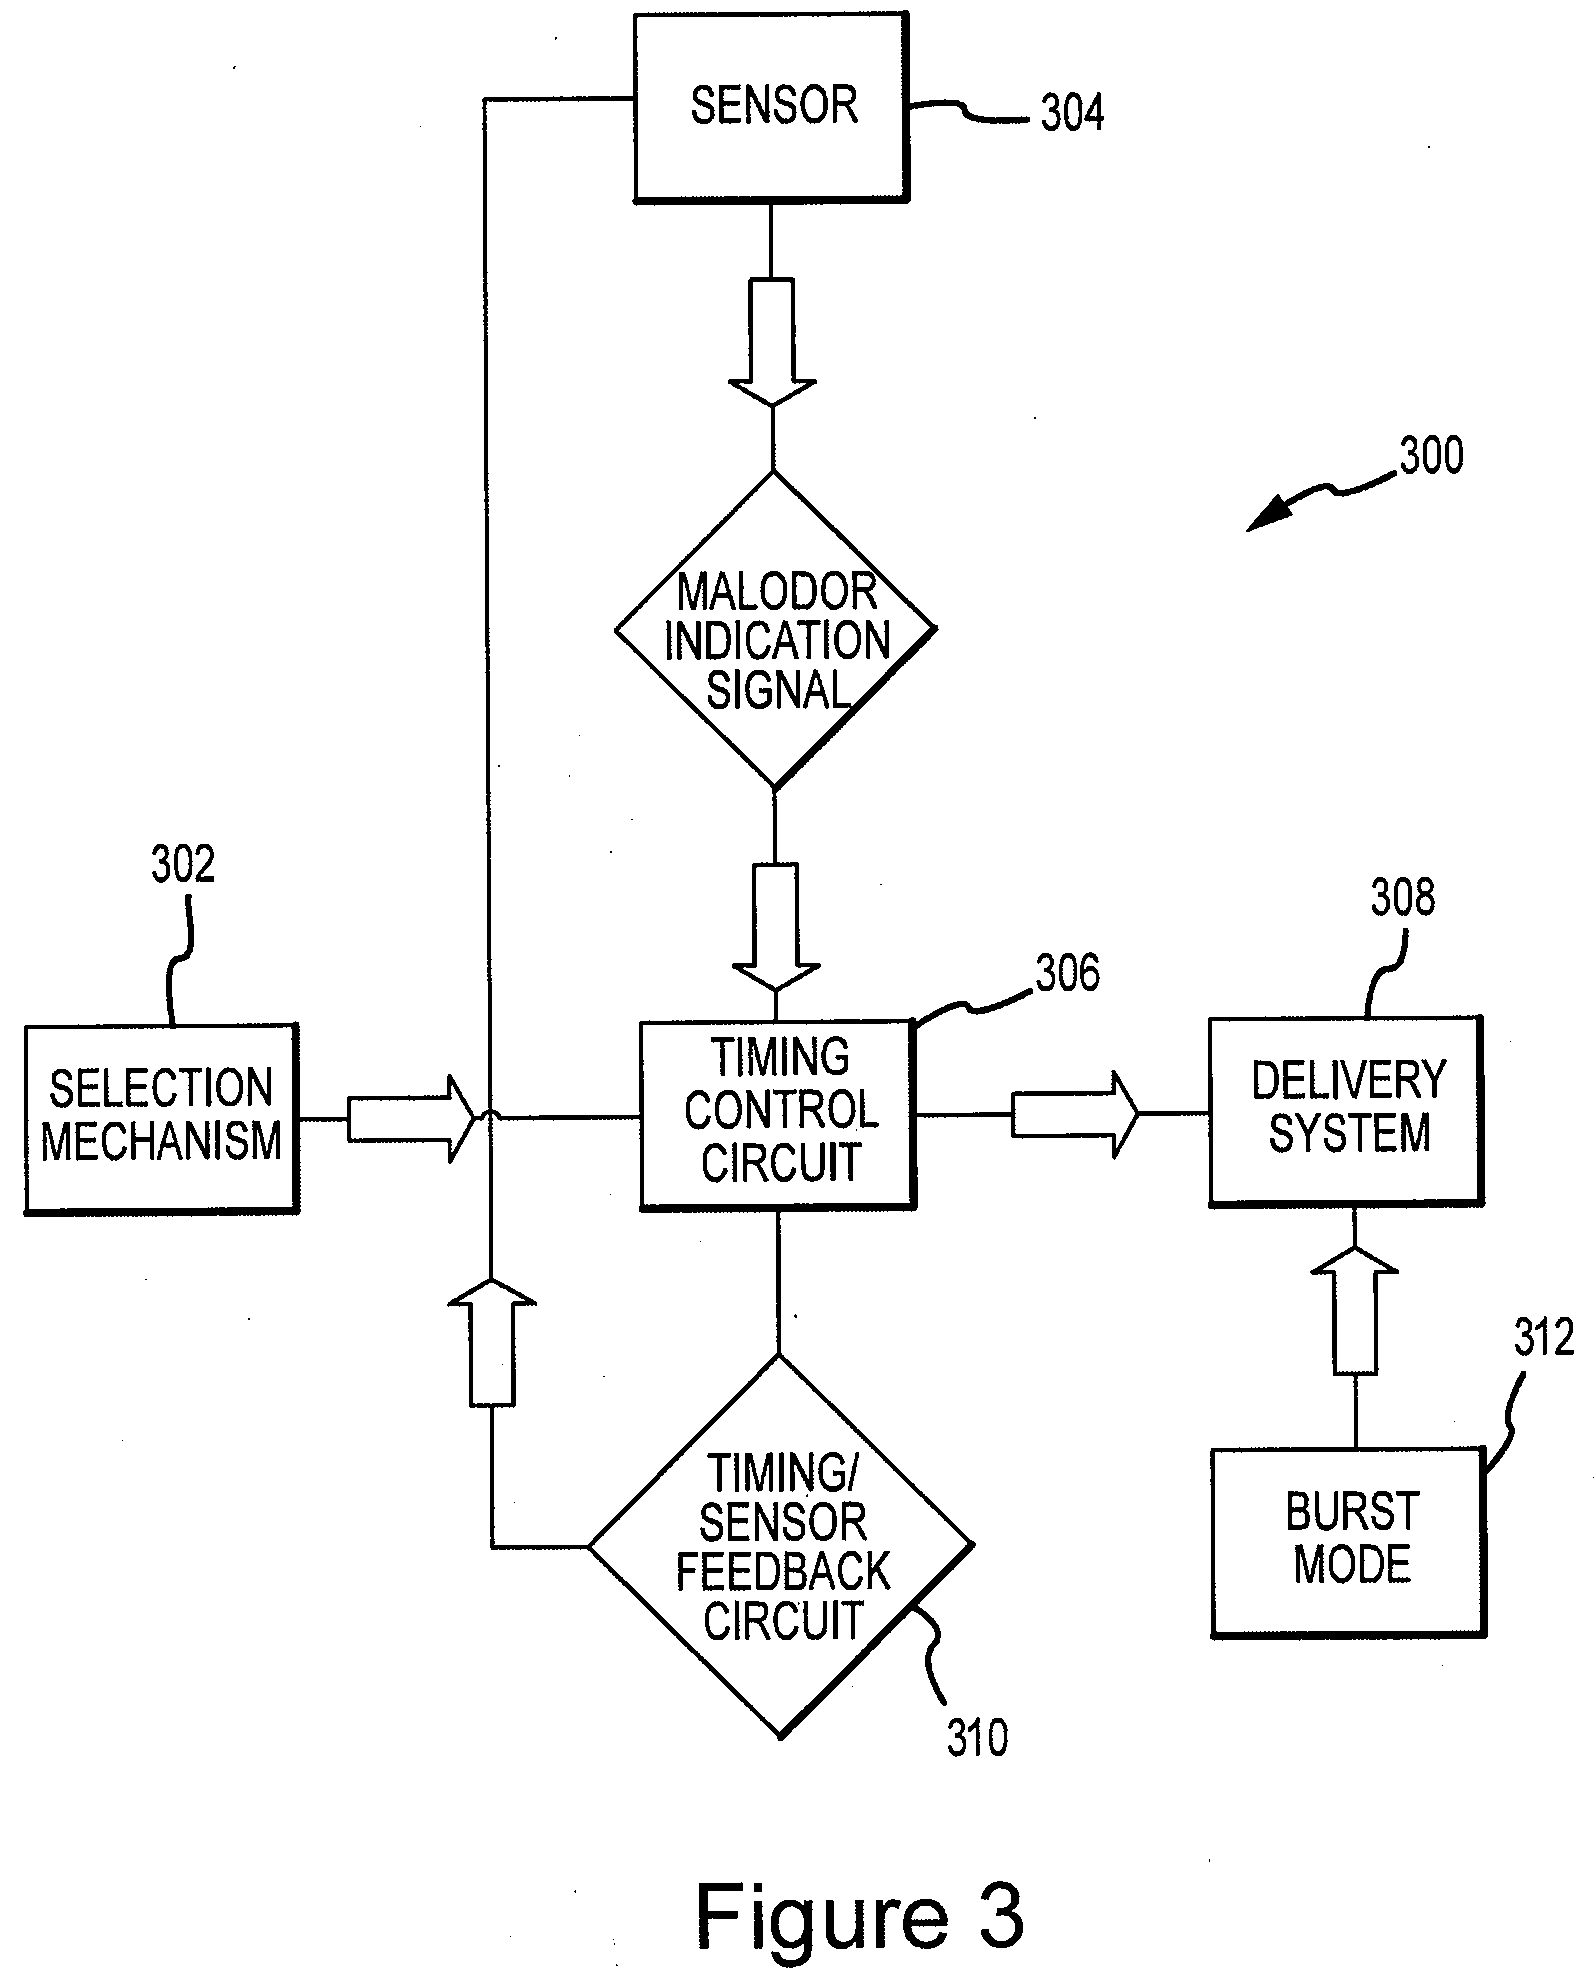 Air Treatment Device Utilizing A Sensor For Activation And Operation